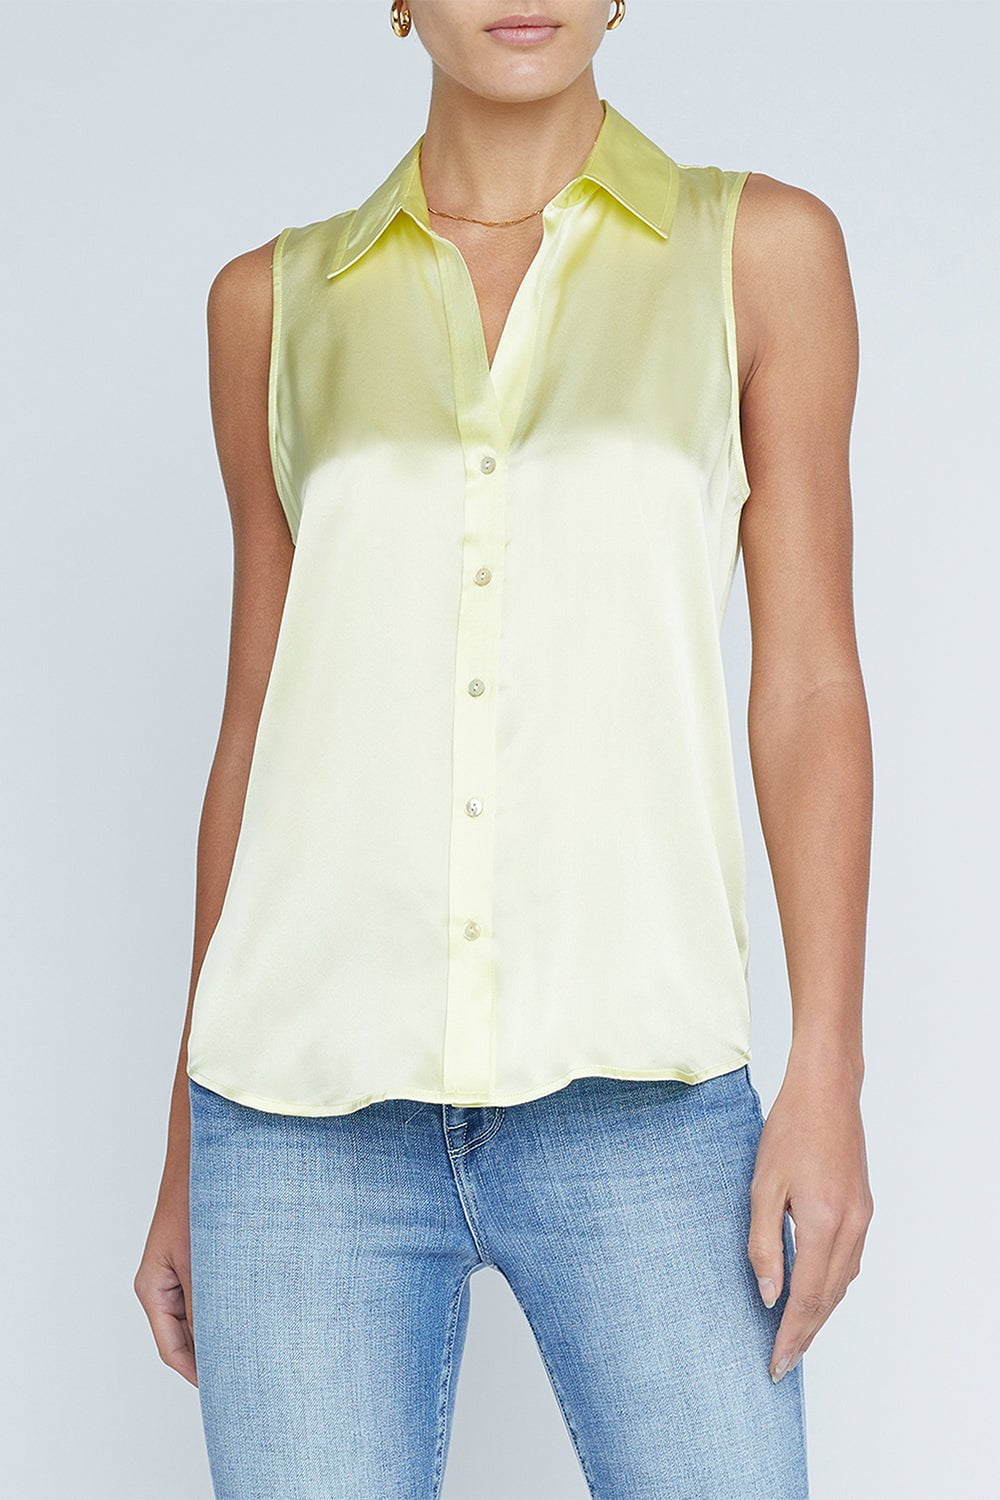 L'AGENCE-Emmy Blouse - Yellow Sorbet-